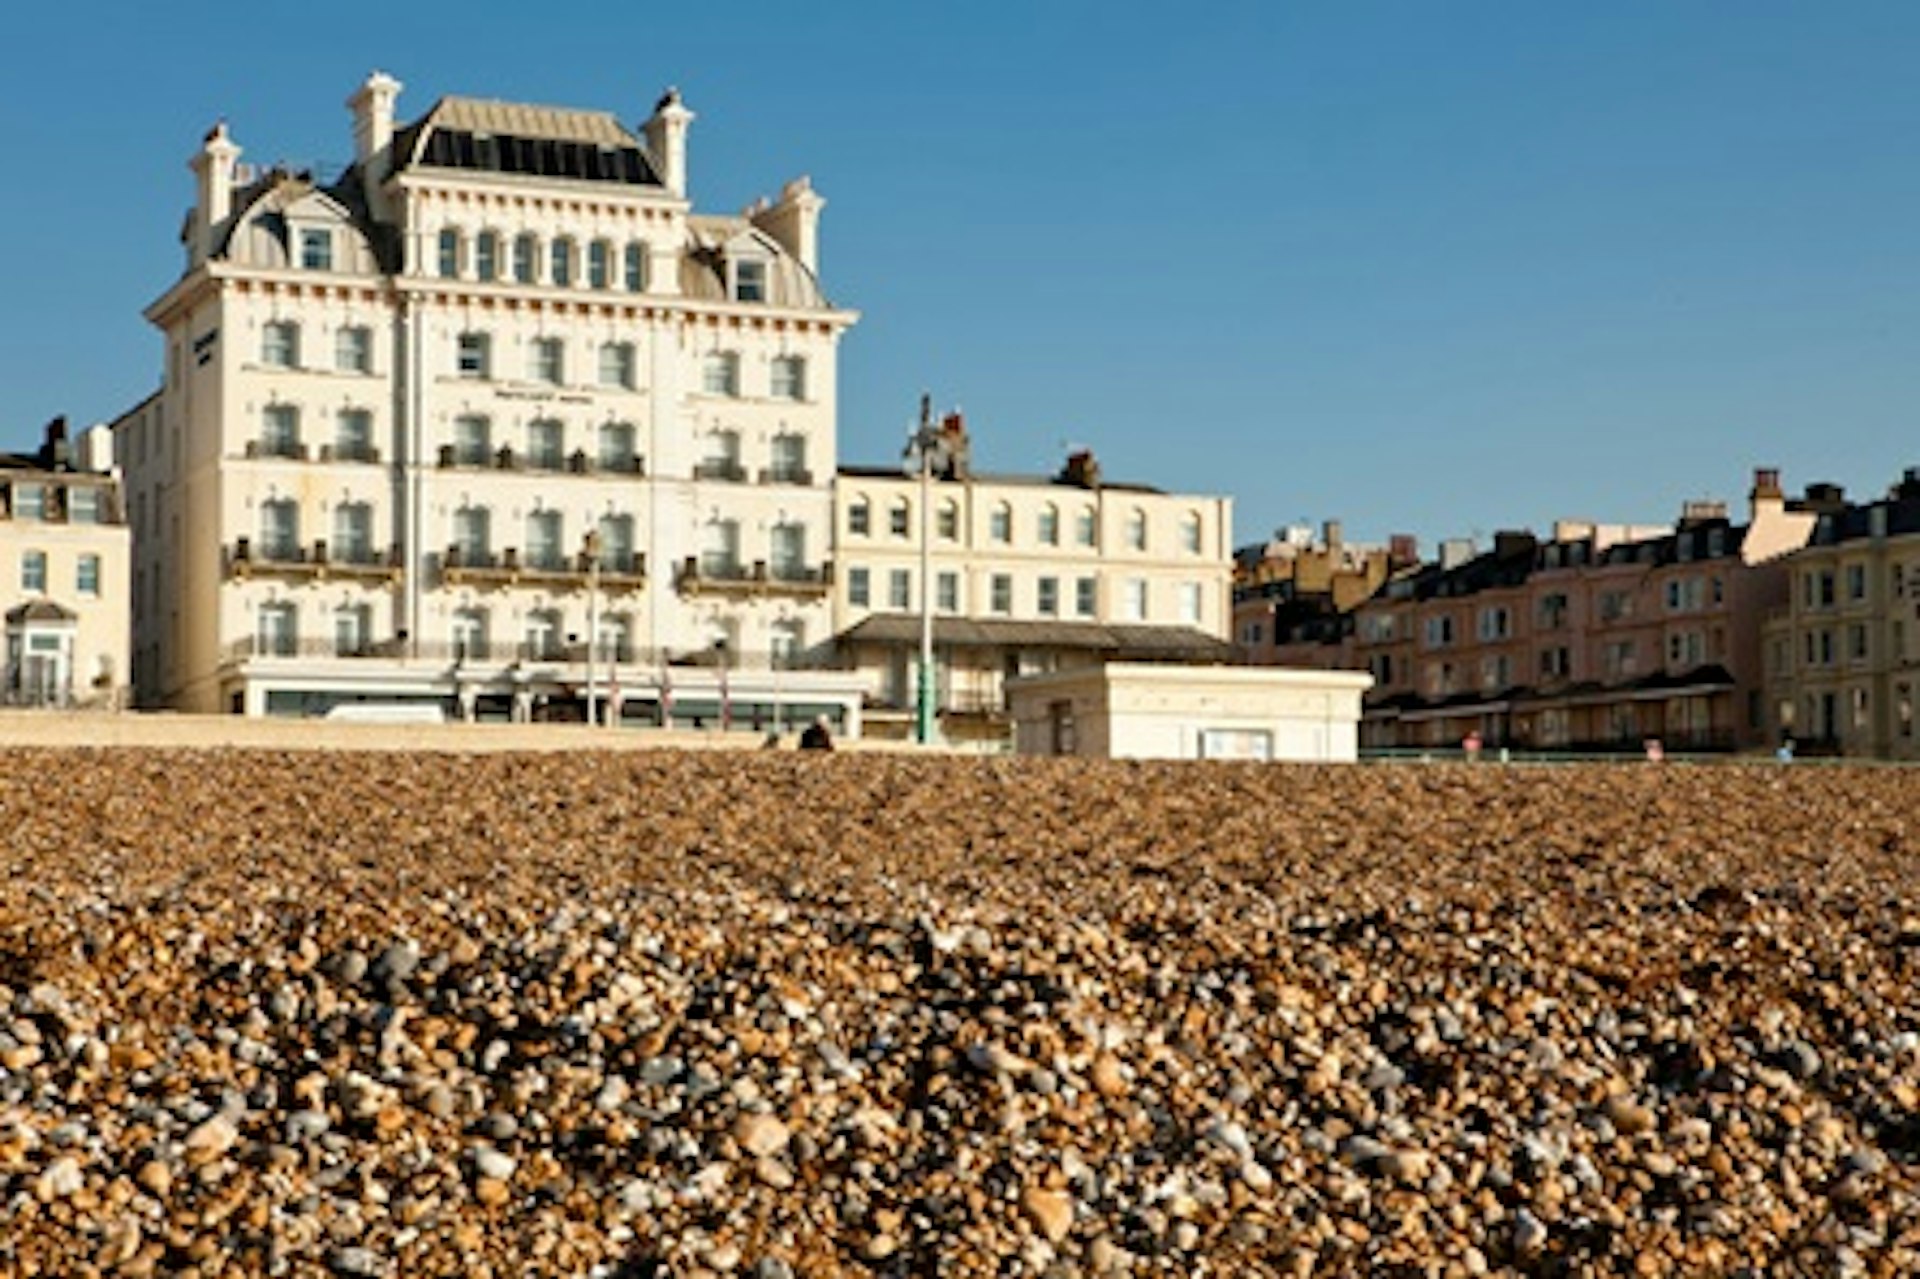 Two Night Break with Dinner for Two at the Mercure Brighton Seafront Hotel 4